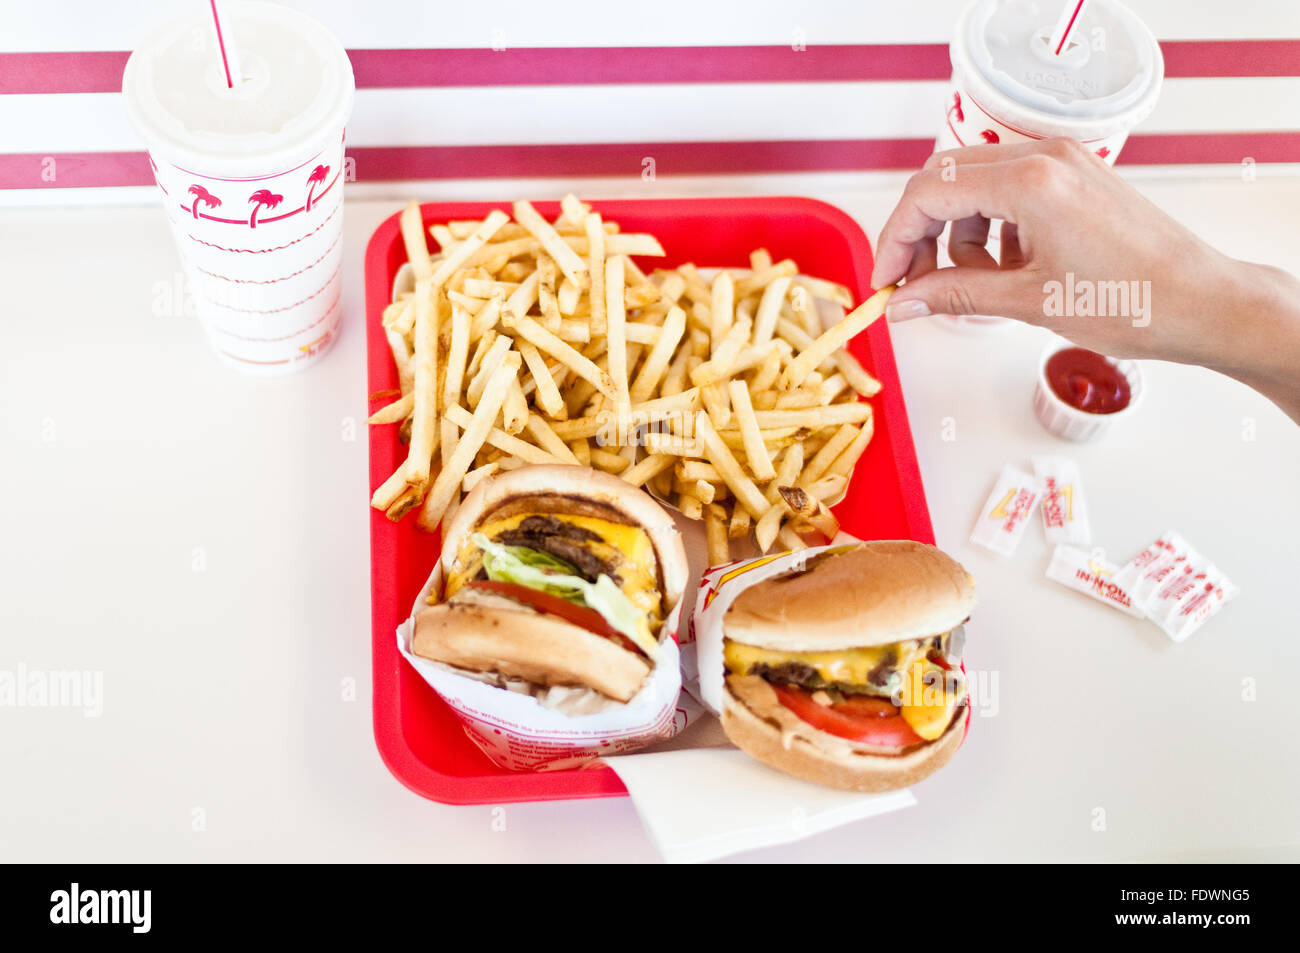 A hand takes a french fry from a tray of cheeseburgers and fries waiting to be eaten at In-N-Out Burger, Los Angeles, California Stock Photo